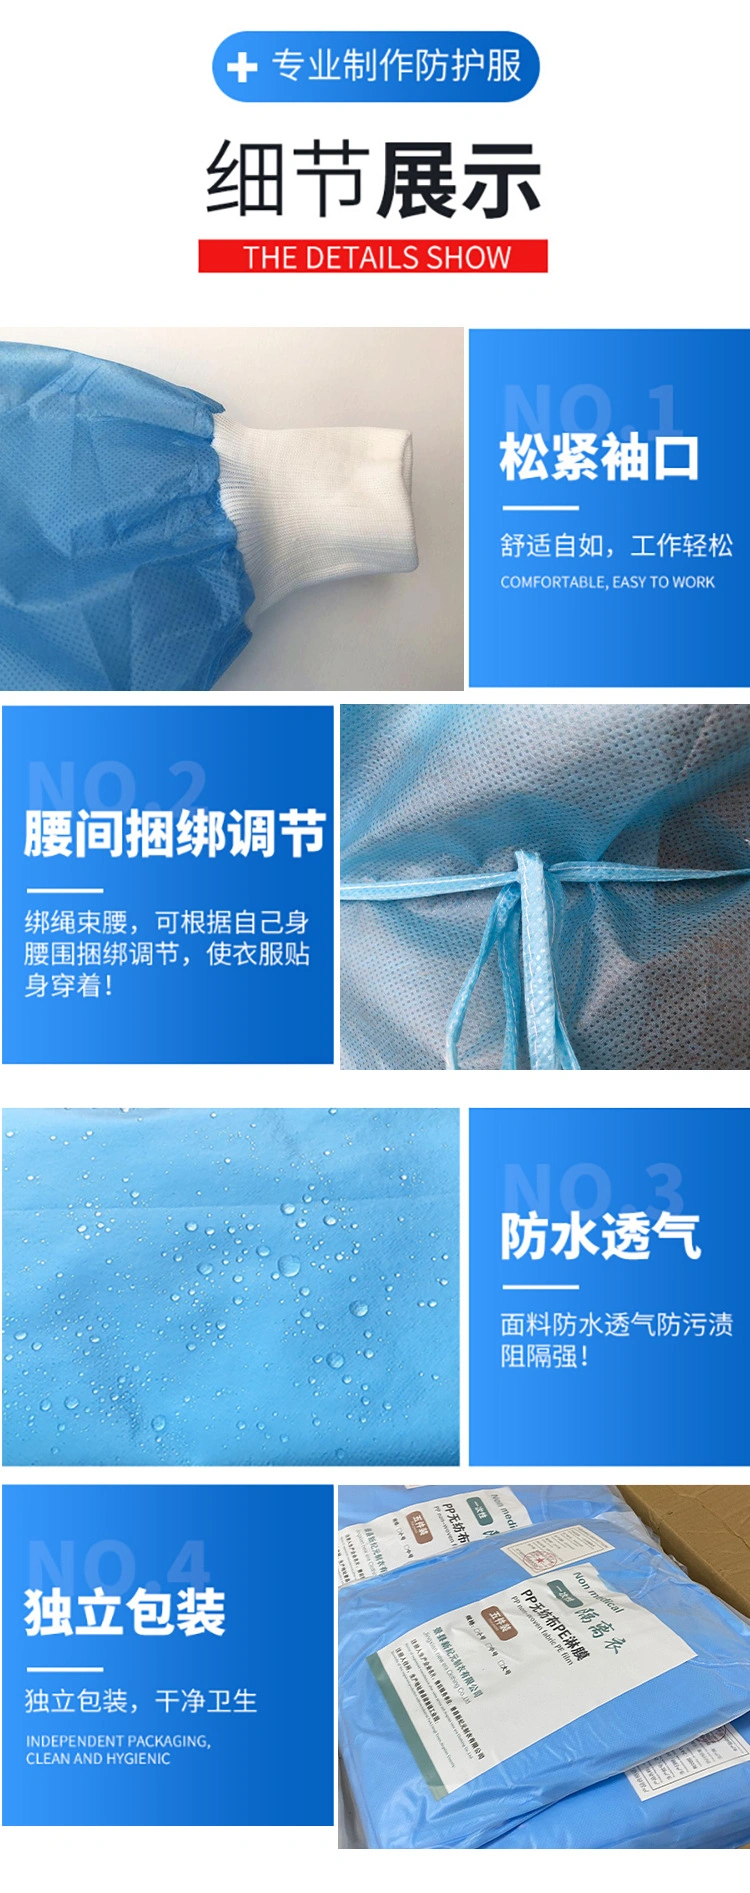 SMS Disposable Non-Woven Protective Clothing Dustproof, Waterproof and Anti-Virus Work Clothes Factory Direct Export Quality